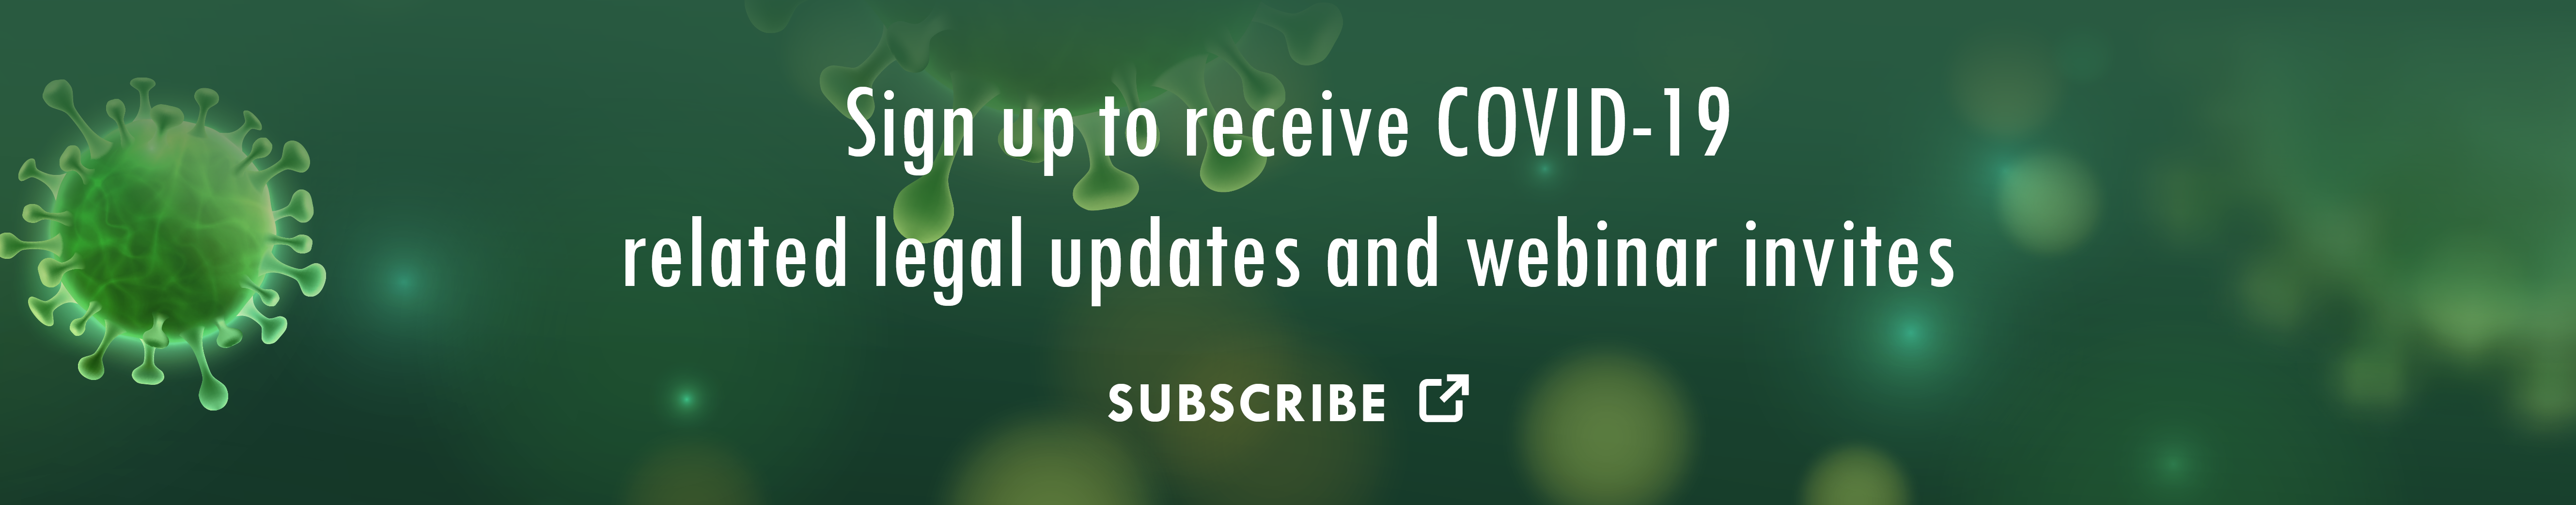 Sign up to receive COVID-19 updates and webinar invites